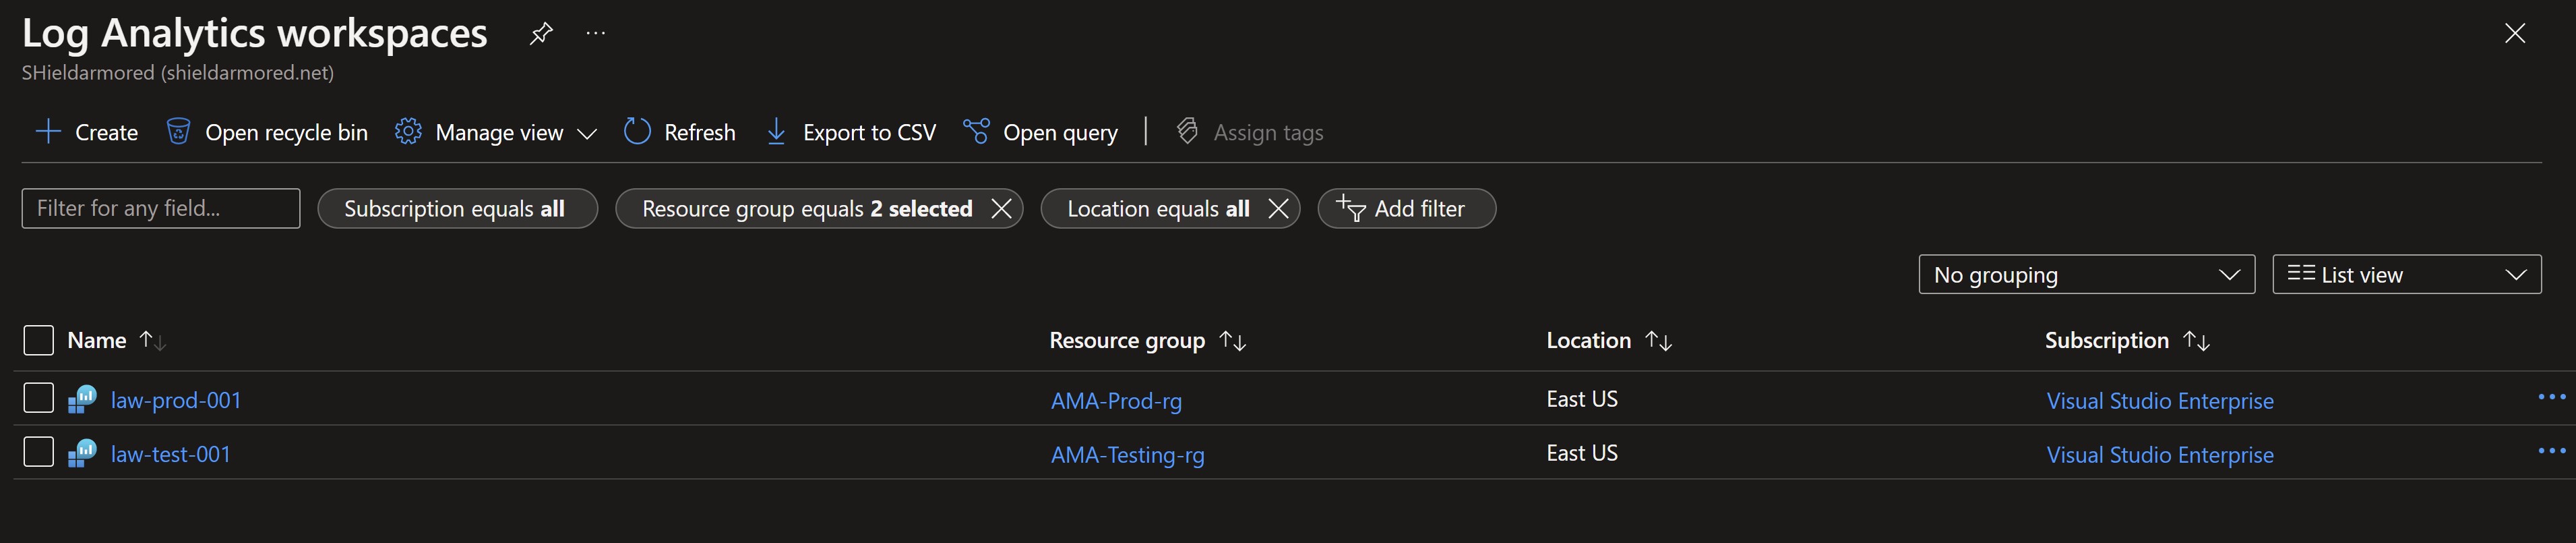 Screenshot showing two resource groups for test and production